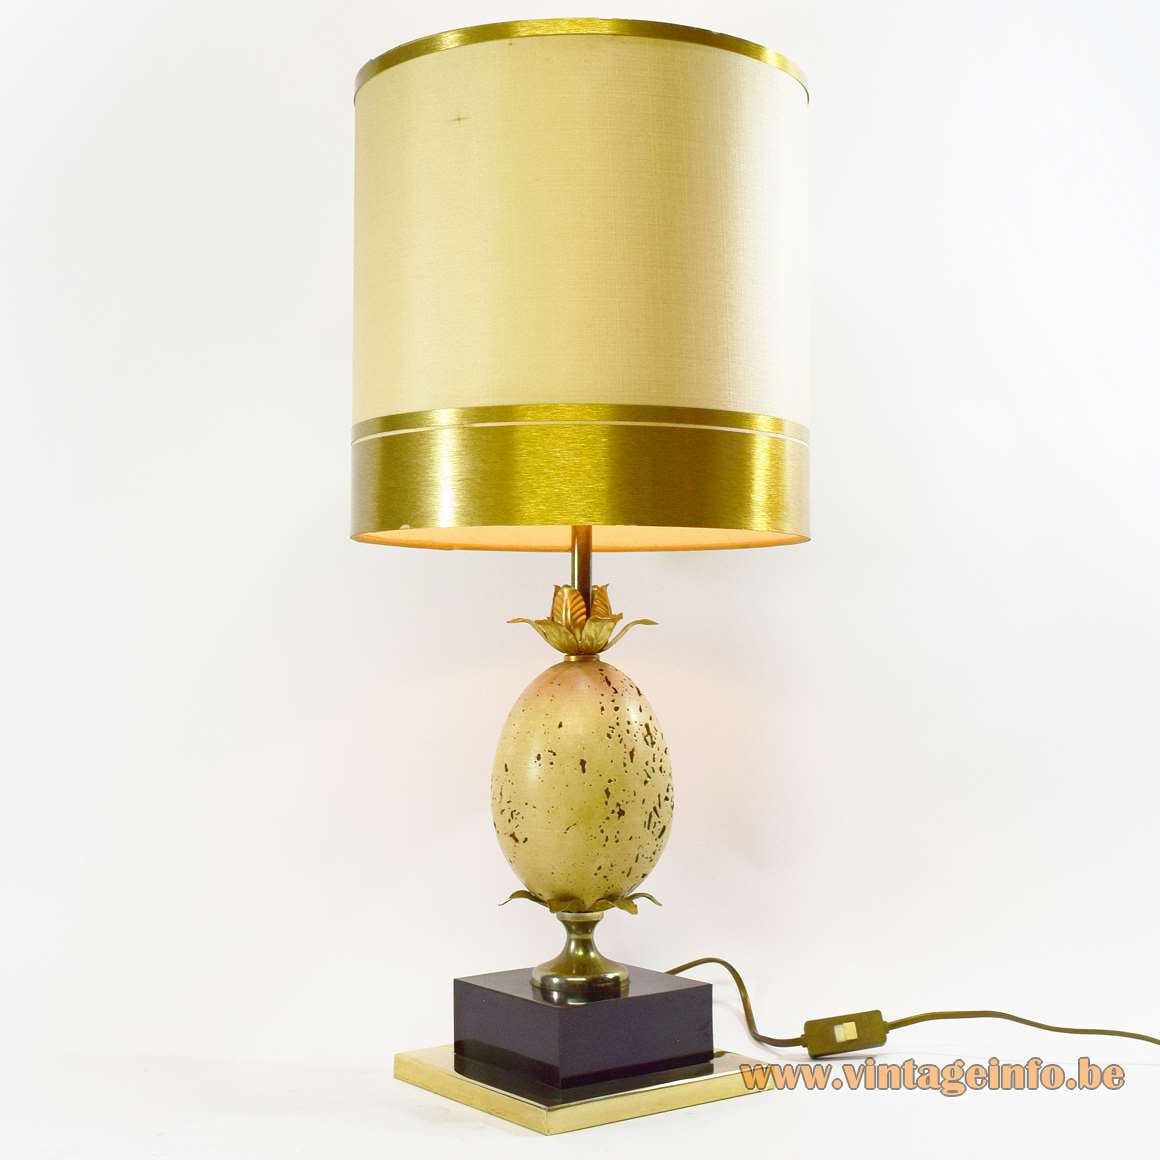 Travertine Ostrich Egg Table Lamp or pineapple light Oxford Le Dauphin France 1970s 1980s Hollywood Regency